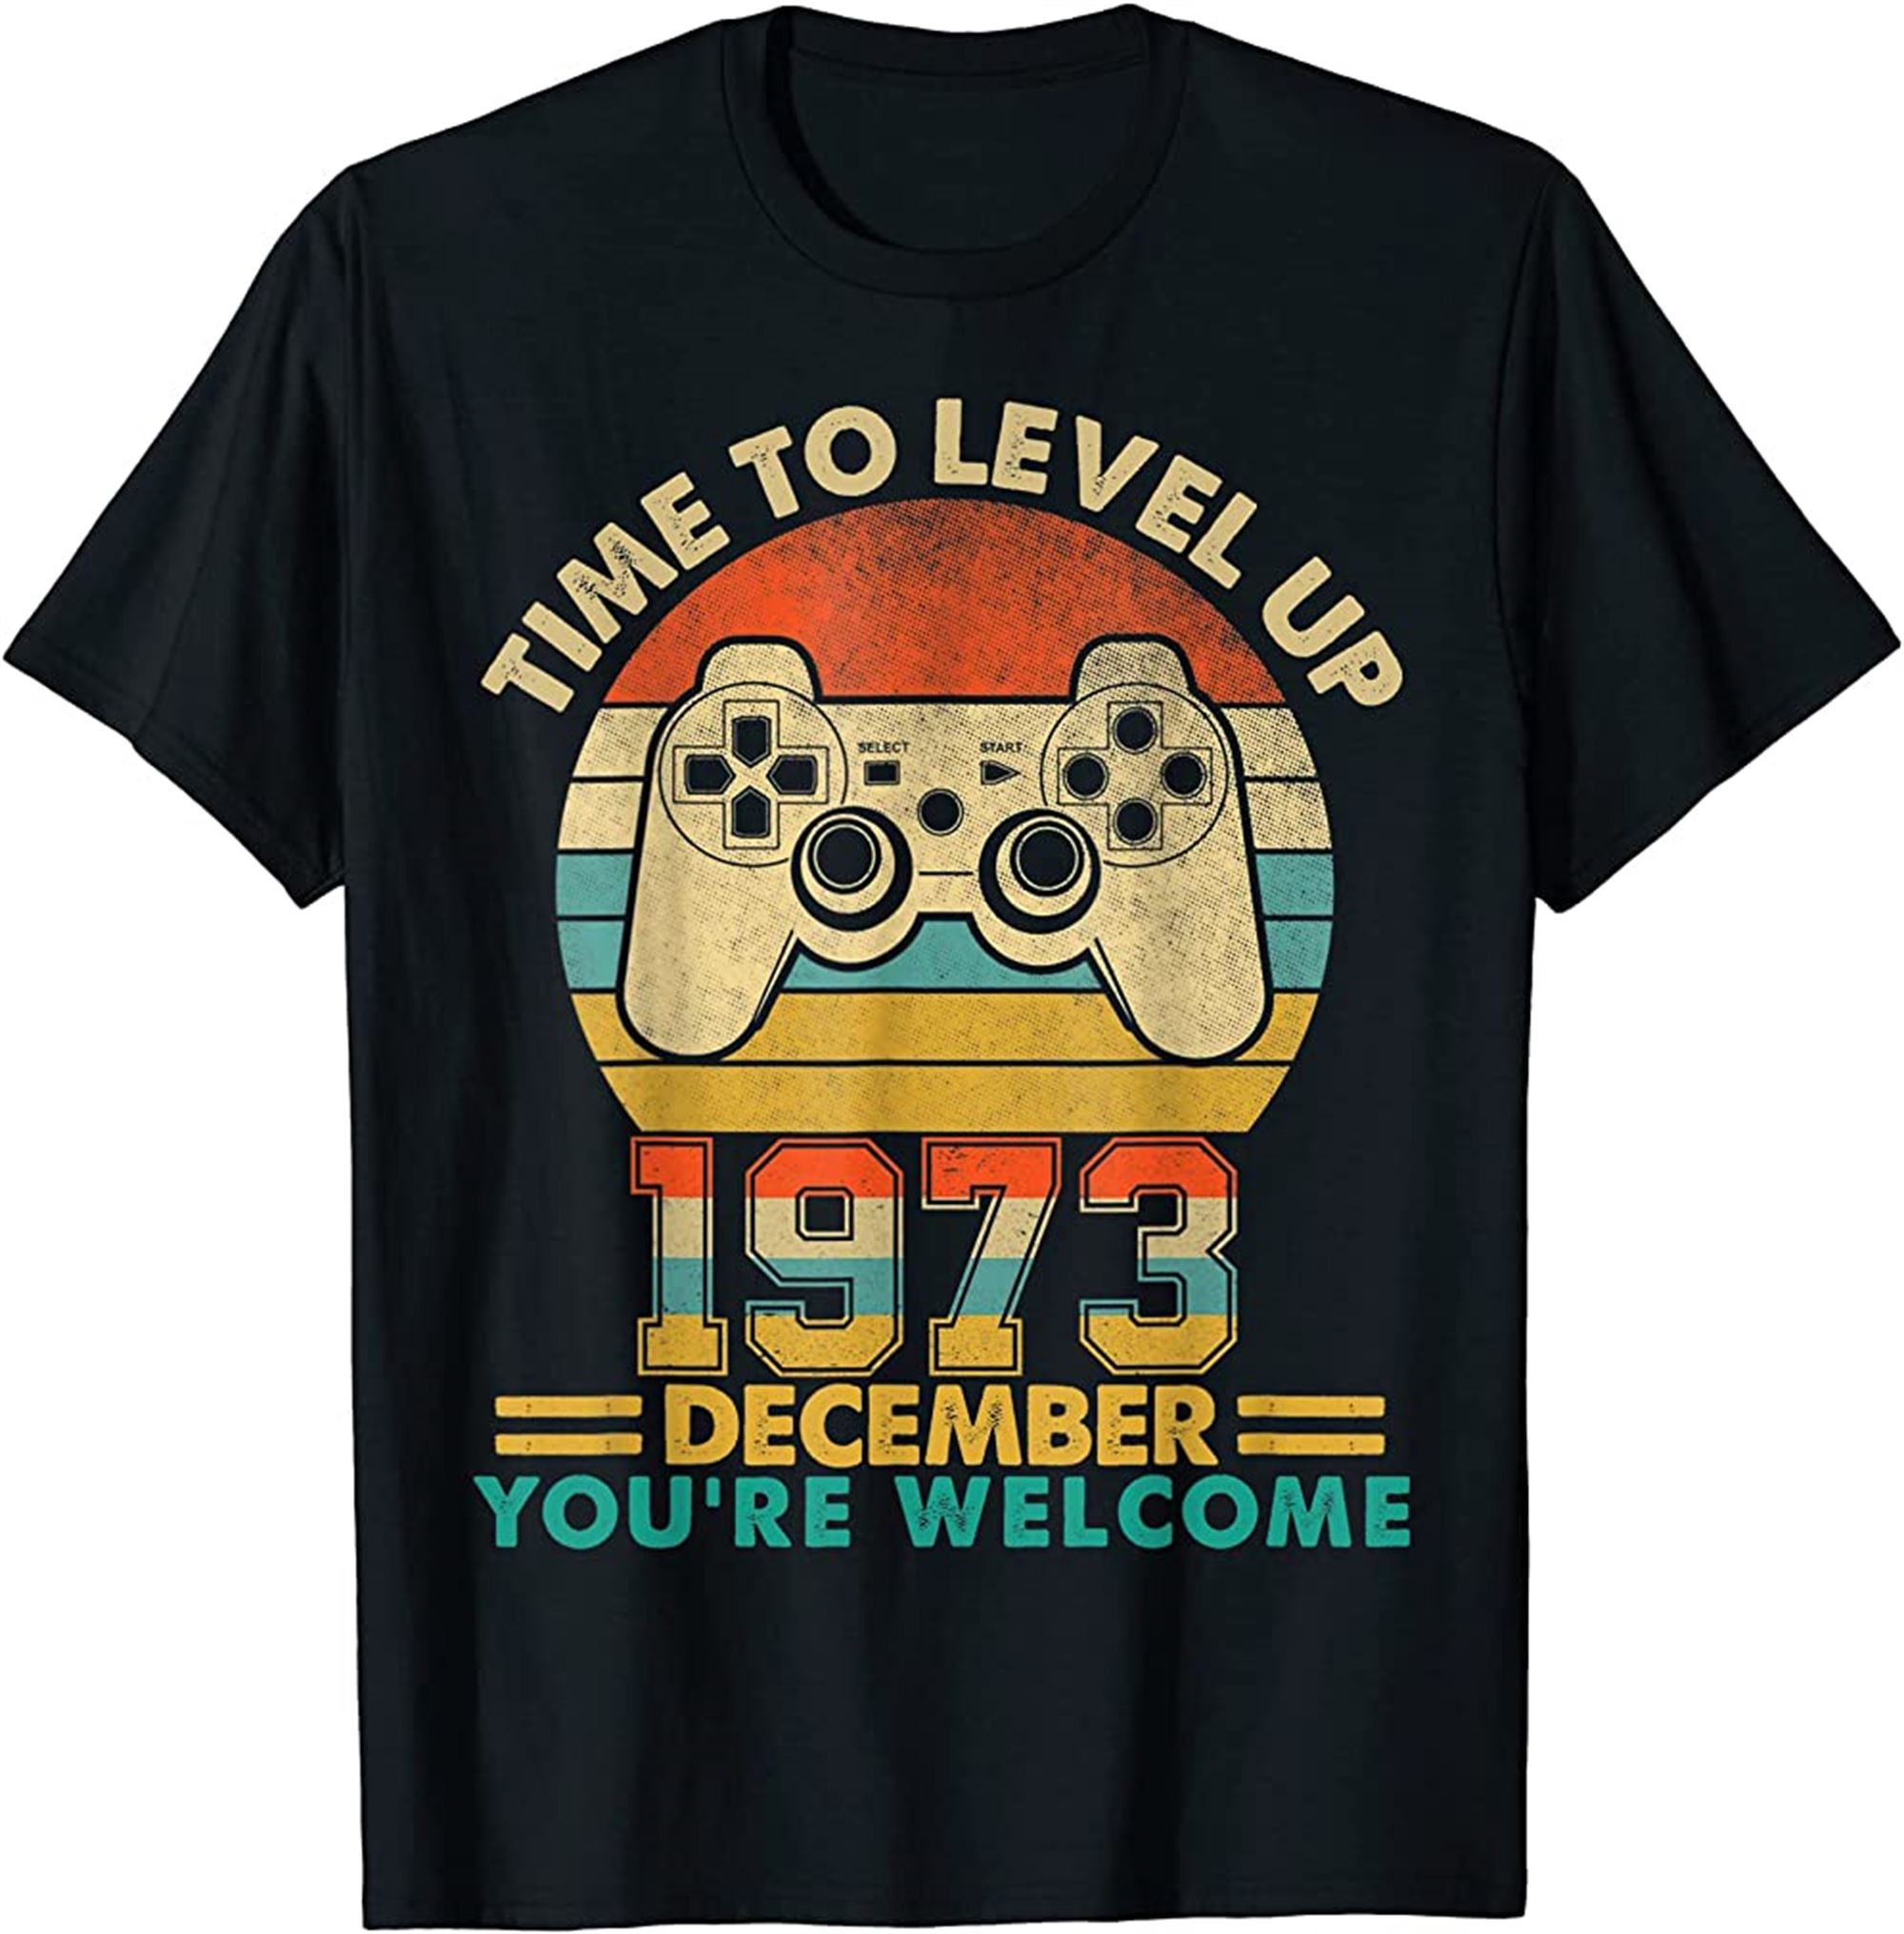 Vintage 1973 December 49 Years Video Gamer 49th Birthday T-shirt Size Up To 5xl